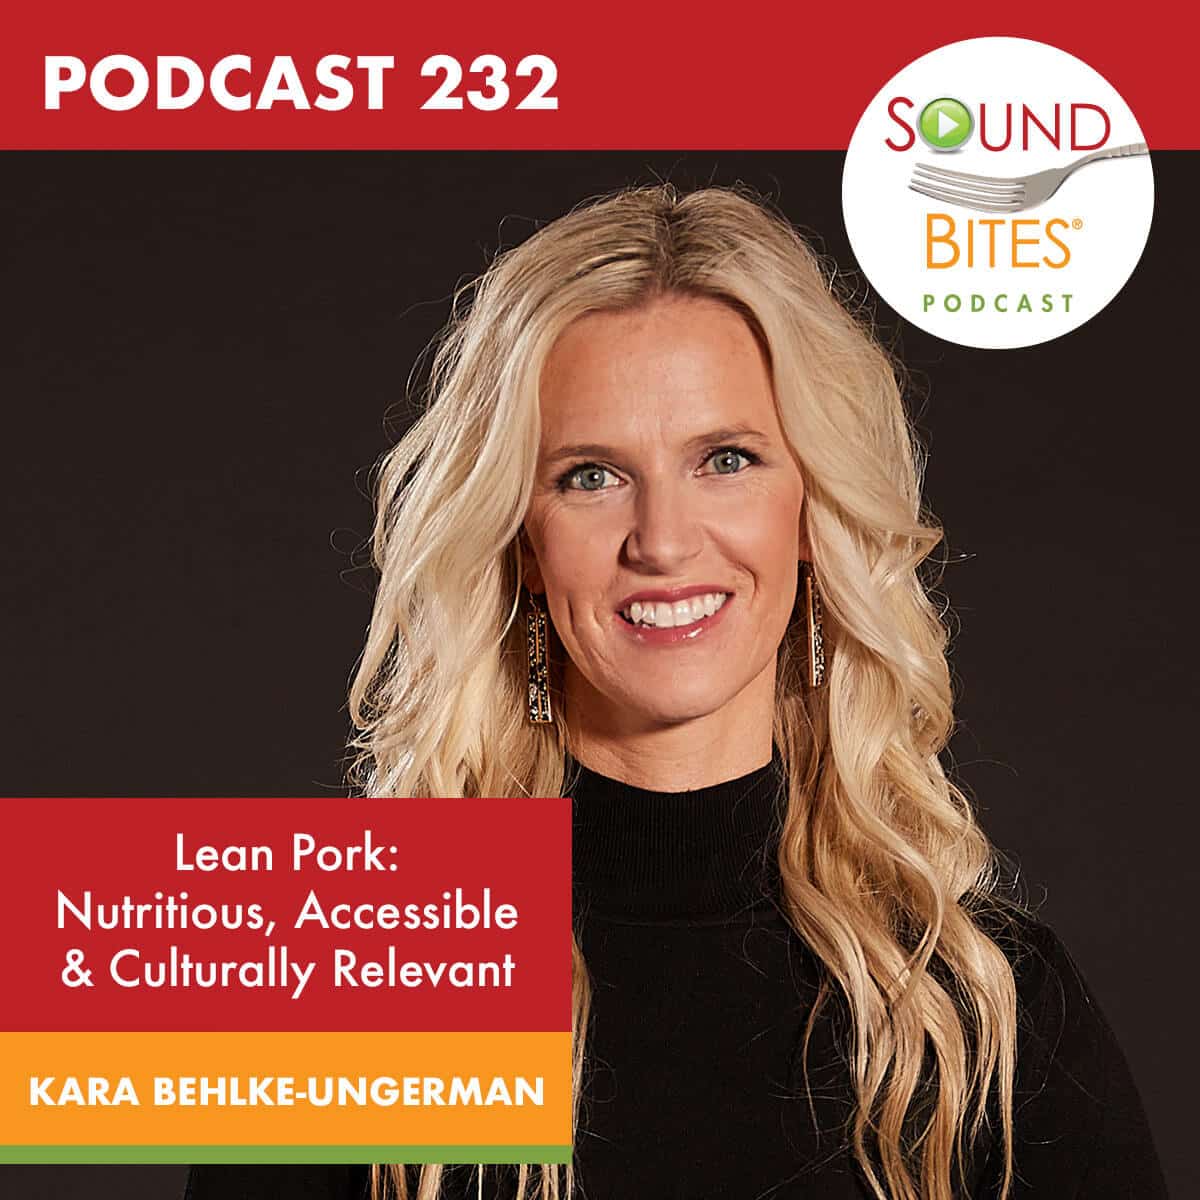 Podcast Episode 232: Lean Pork: Nutritious, Accessible & Culturally Relevant – Kara Behlke-Ungerman